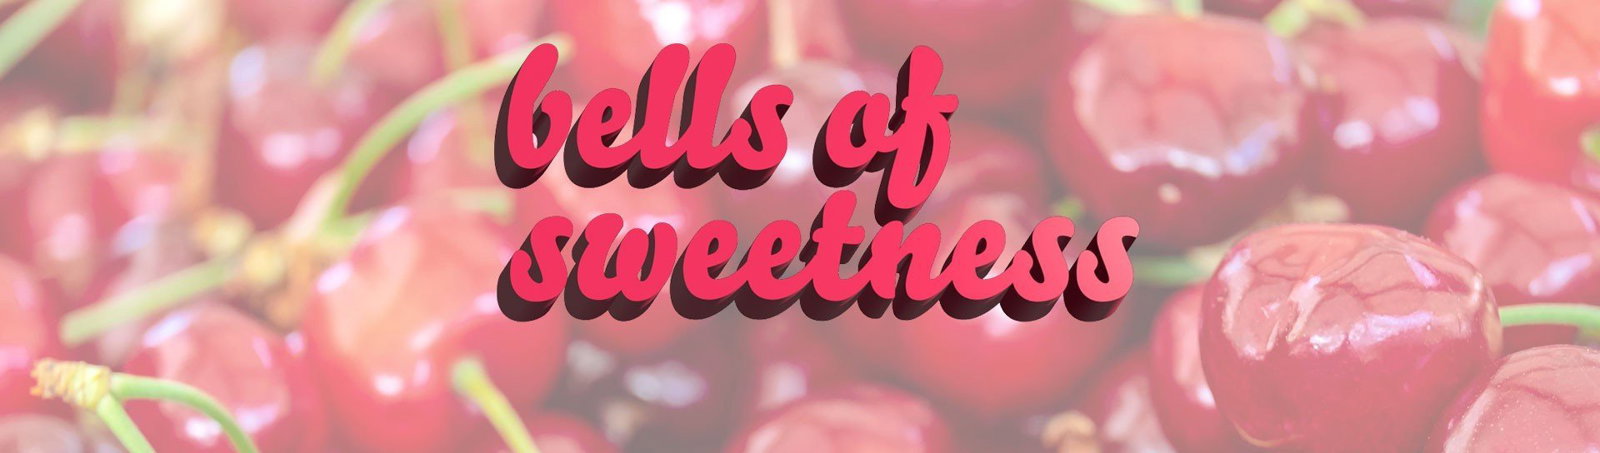 Cover photo of bells of sweetness